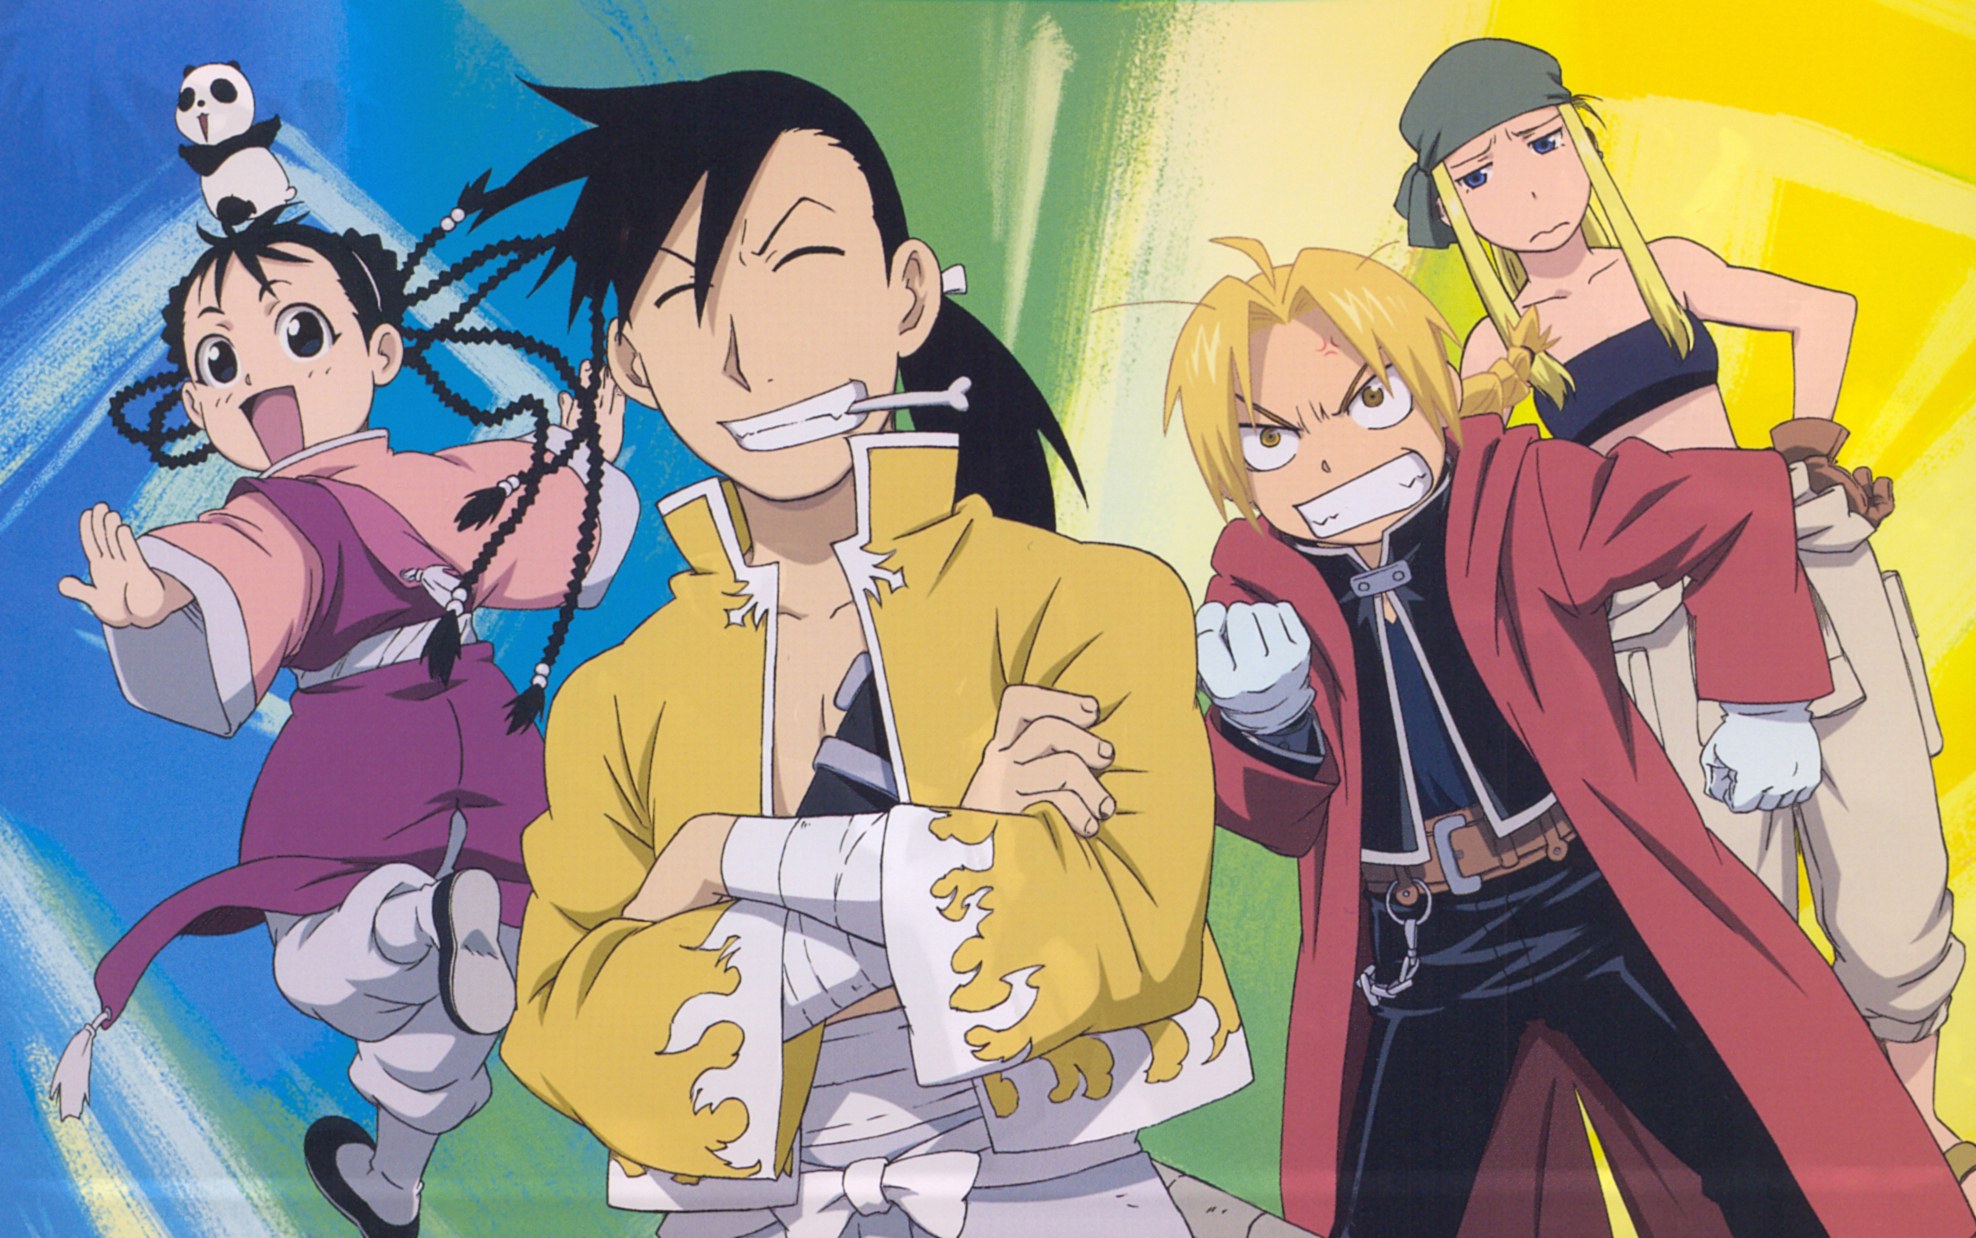 Edward Elric Winry Rockbell May Chang Ling Yao Shao May 1976x1238